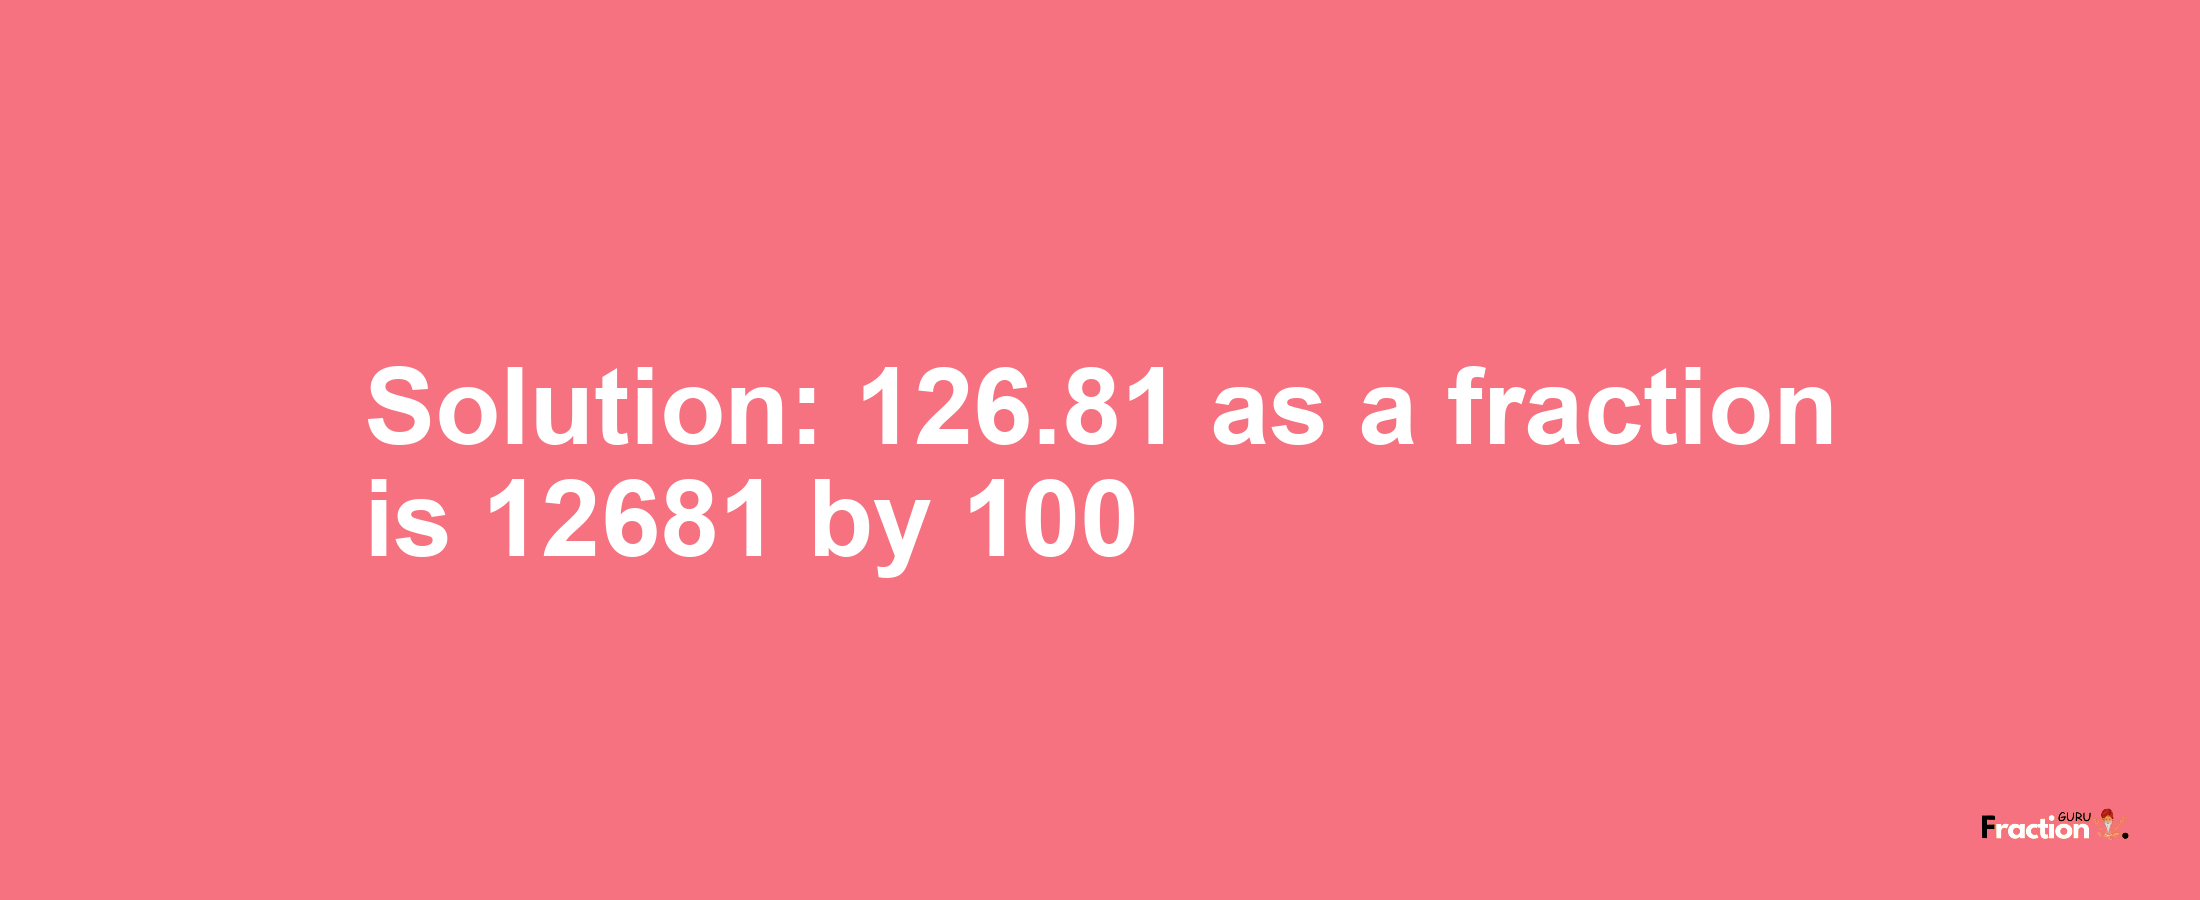 Solution:126.81 as a fraction is 12681/100